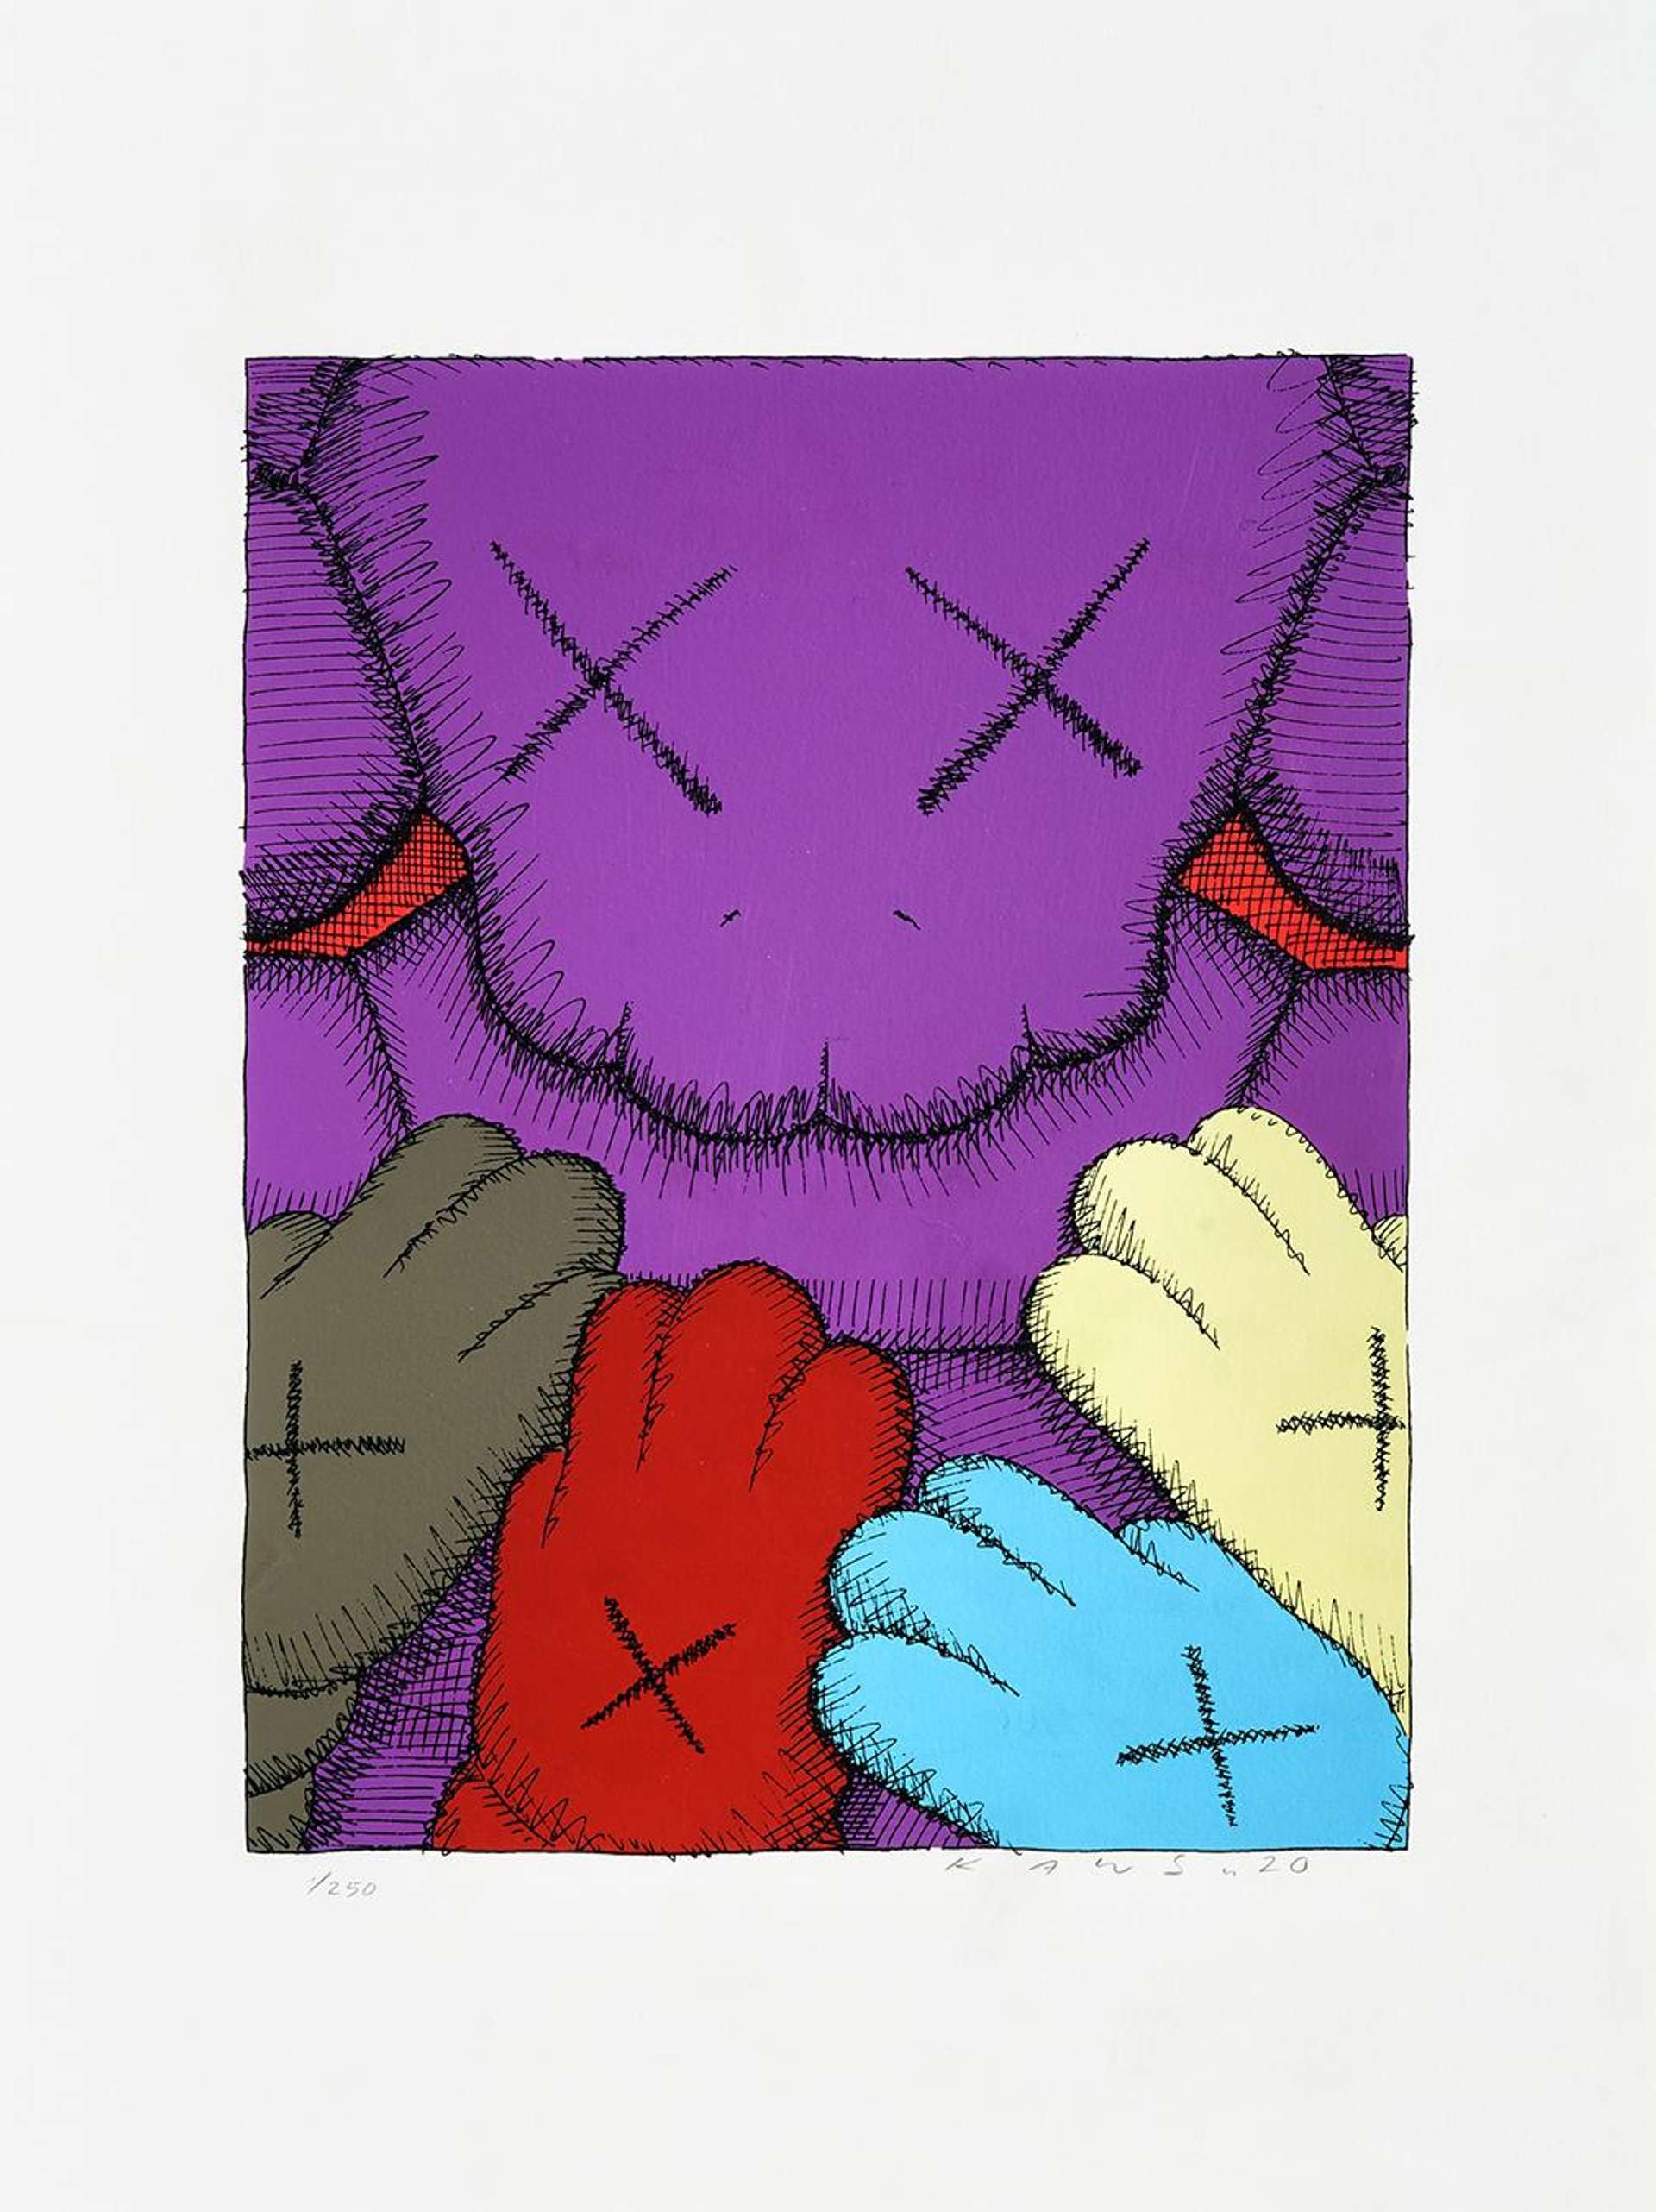 KAWS’ Urge 8. A screenprint of a purple plush character with x marked eyes. There are four similar styled hands in grey, red, light blue, and white, each with an x in the centre of the hand, touching the purple figure.